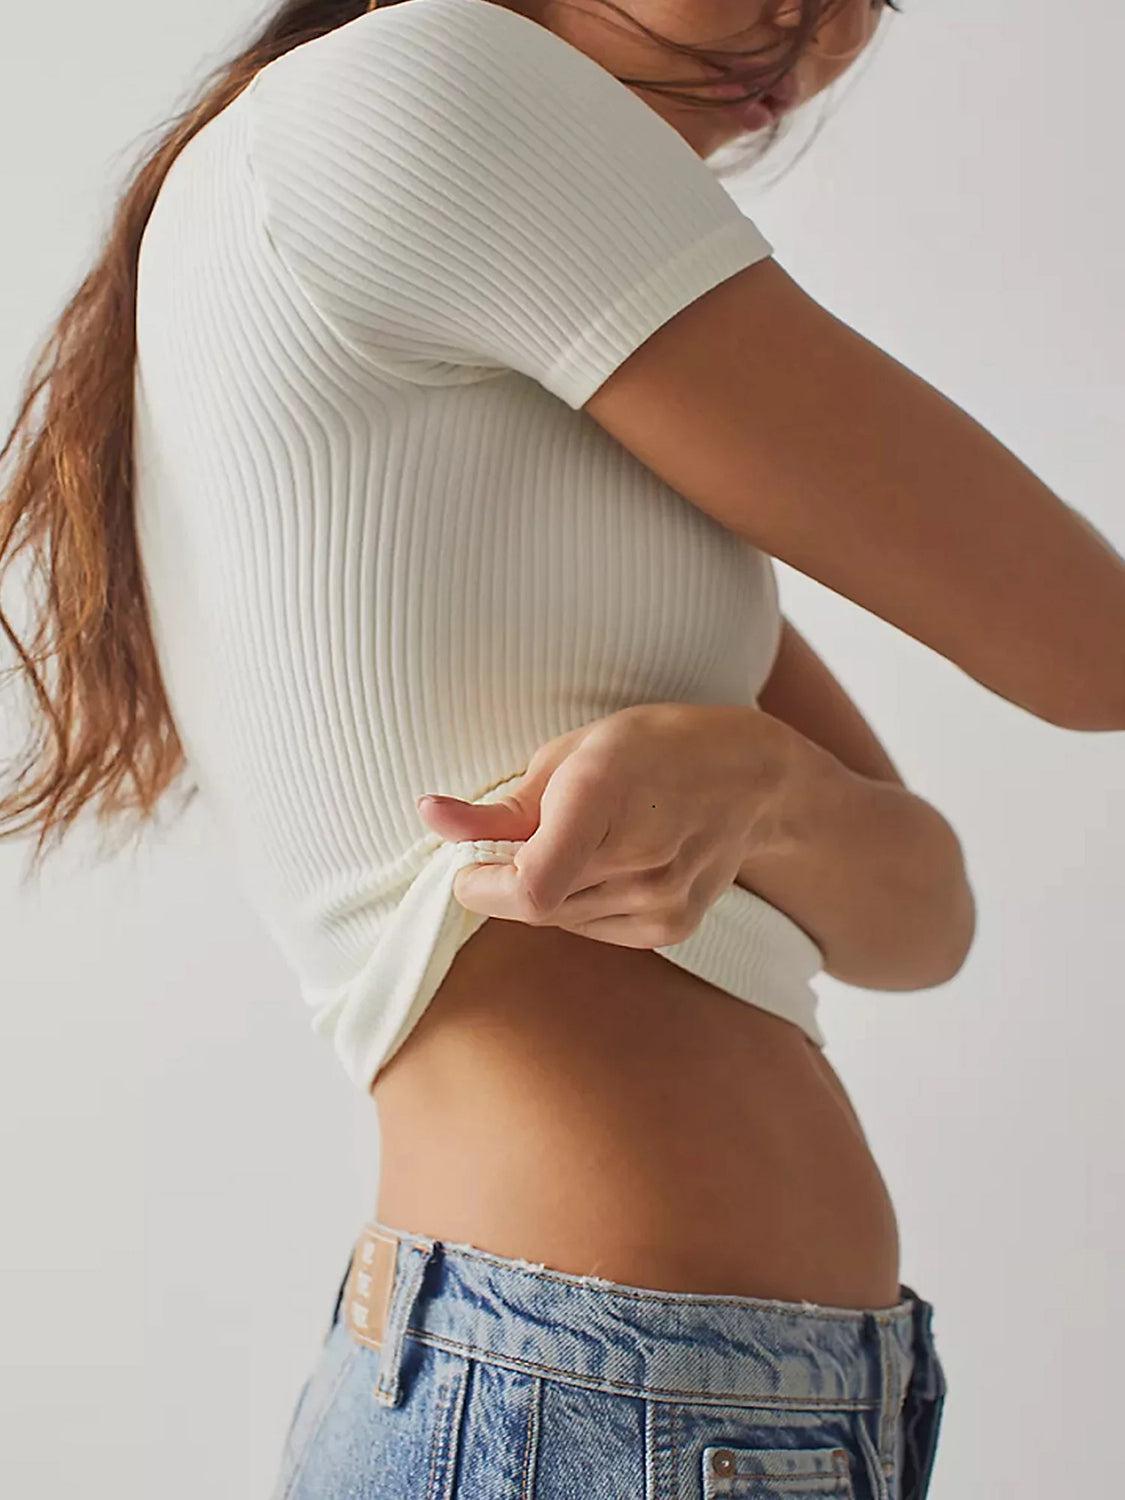 a woman in a white top is holding her stomach